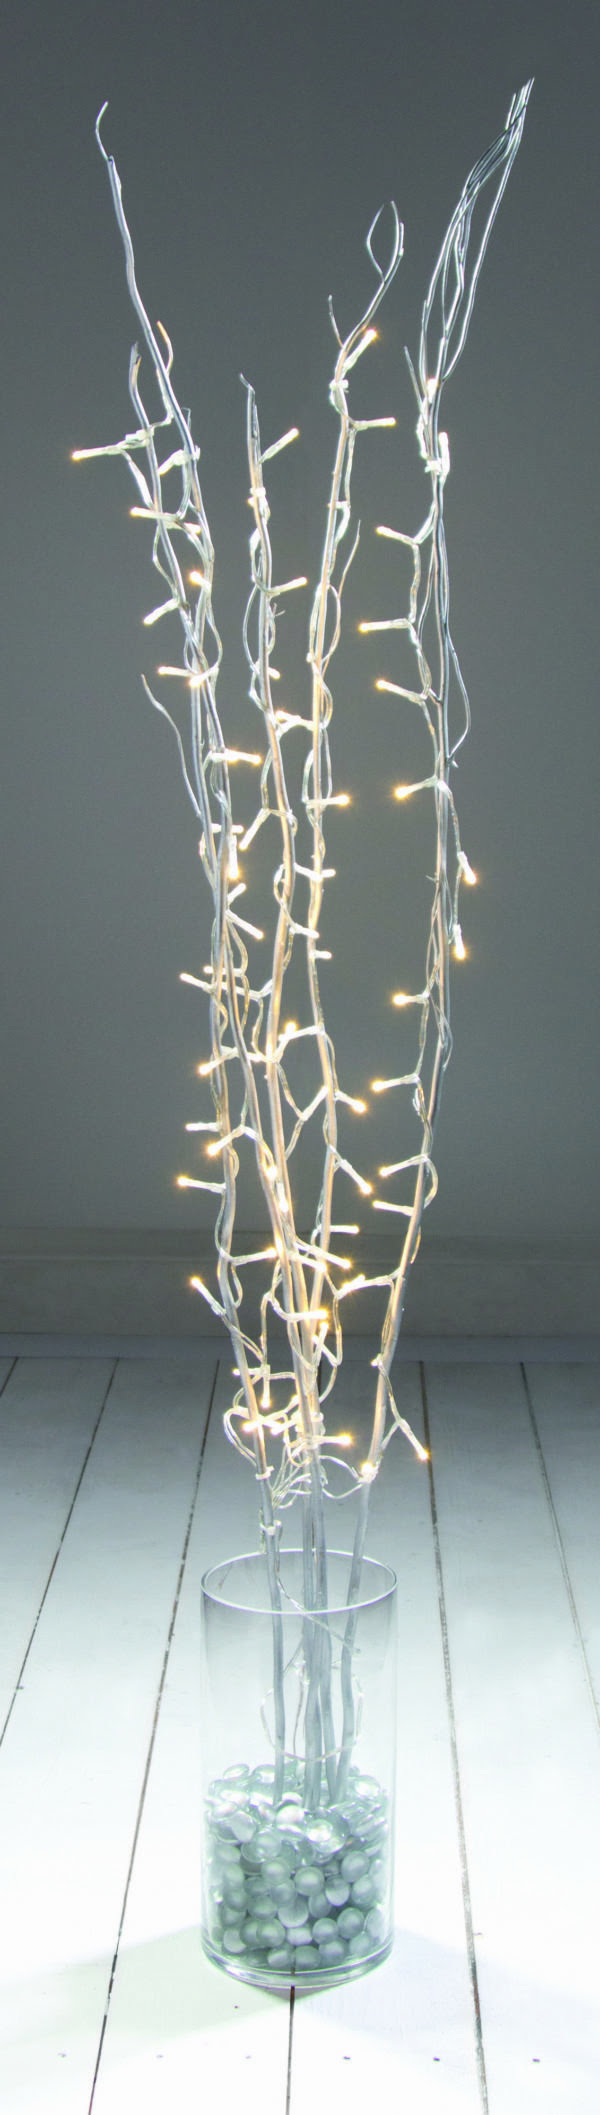 Premier  Silver Twig With 80 Warm White Rice Lights – 1.2M